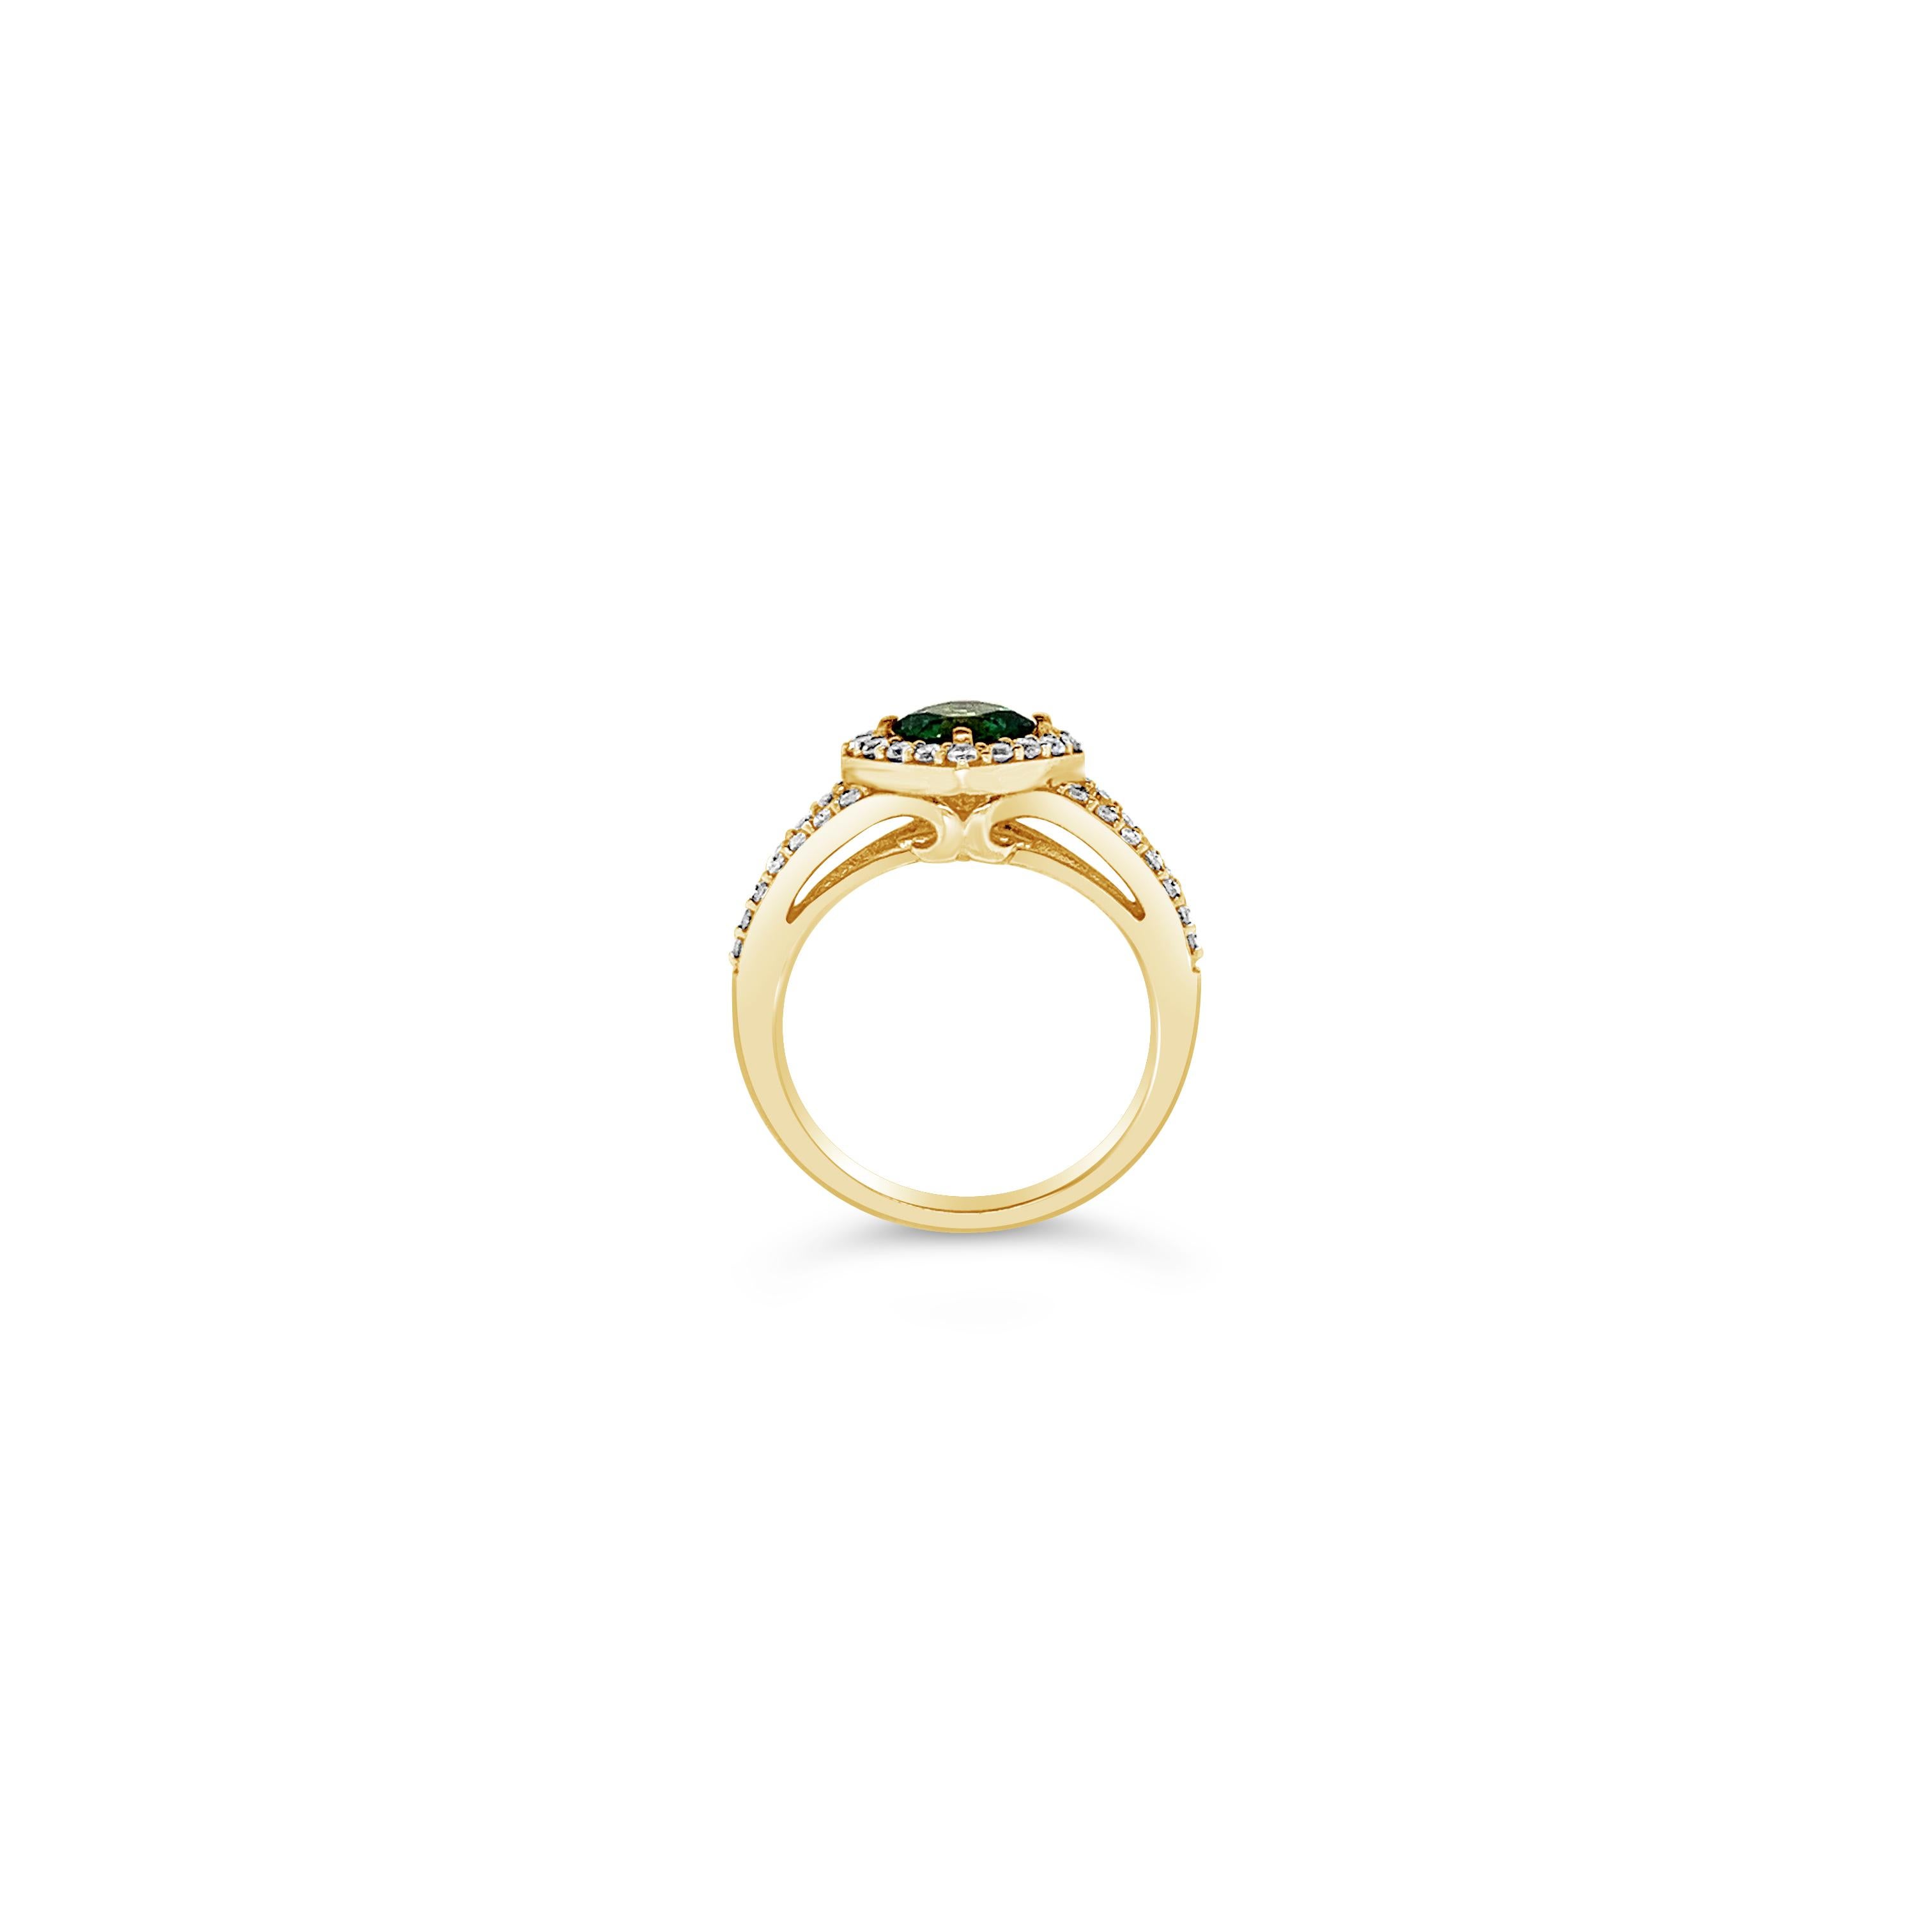 Le Vian® Ring featuring 0.85 cts. Hunters Green Tourmaline, 0.50 cts. Vanilla Diamonds® set in 14K Green Gold

Diamonds Breakdown:
.50 cts White Diamonds

Gems Breakdown:
.85 cts Green Tourmaline

Please feel free to reach out with any